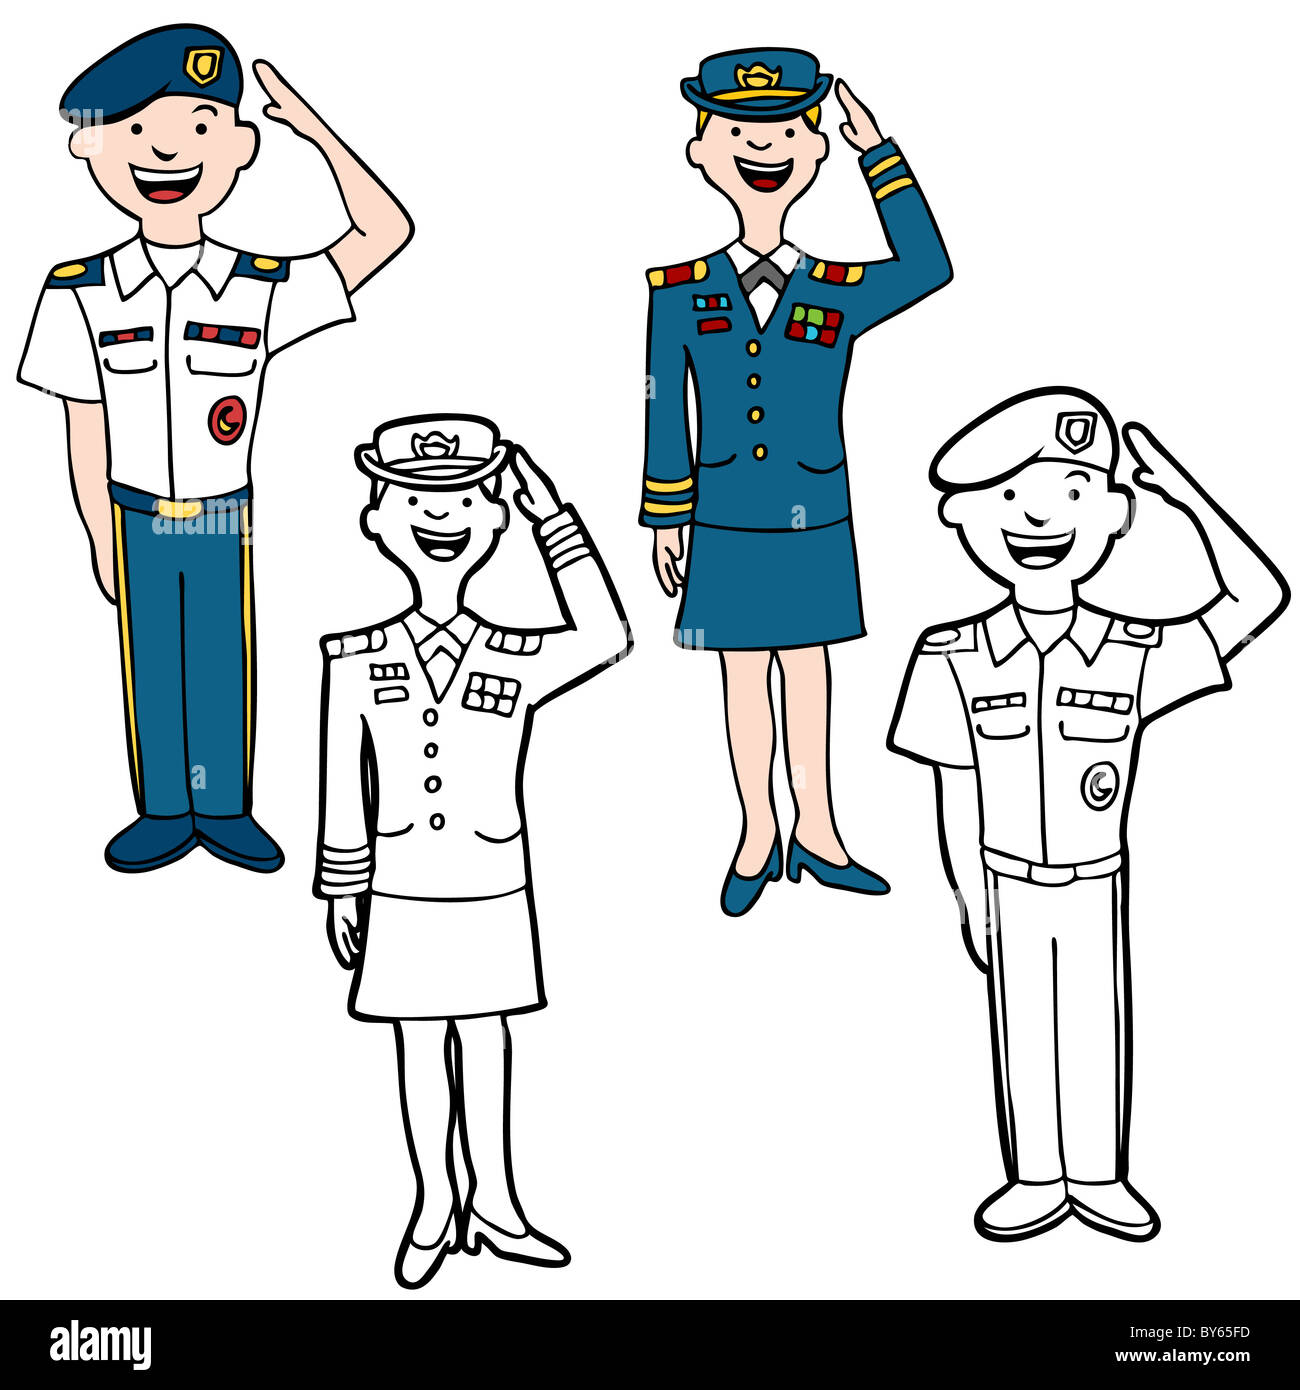 Army cartoon people isolated on a white background. Stock Photo